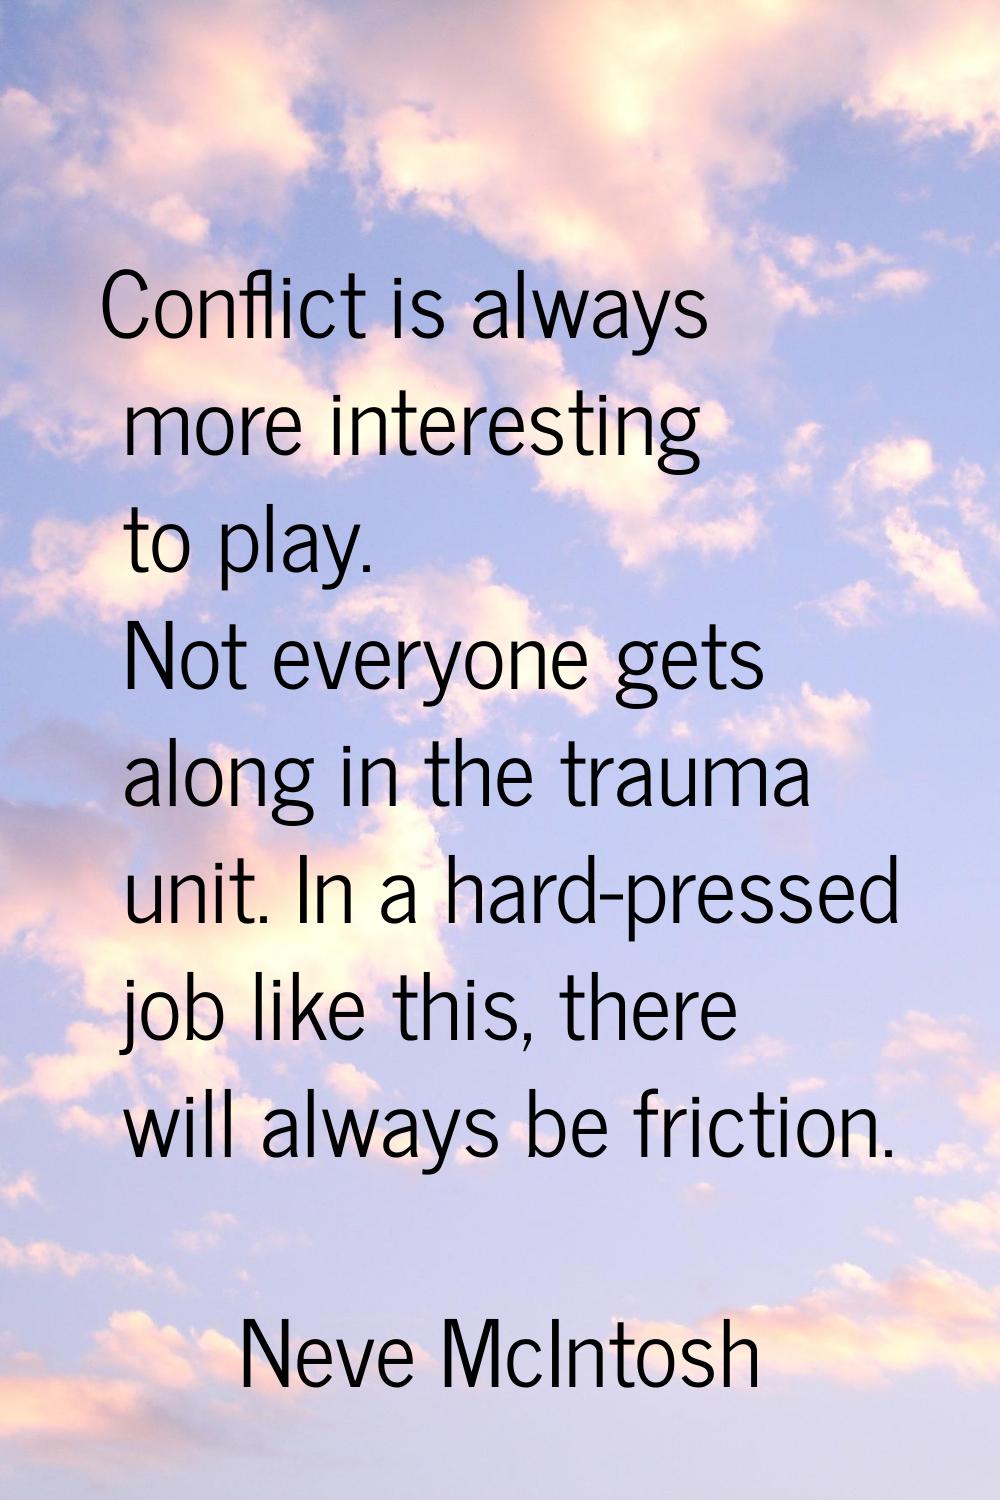 Conflict is always more interesting to play. Not everyone gets along in the trauma unit. In a hard-